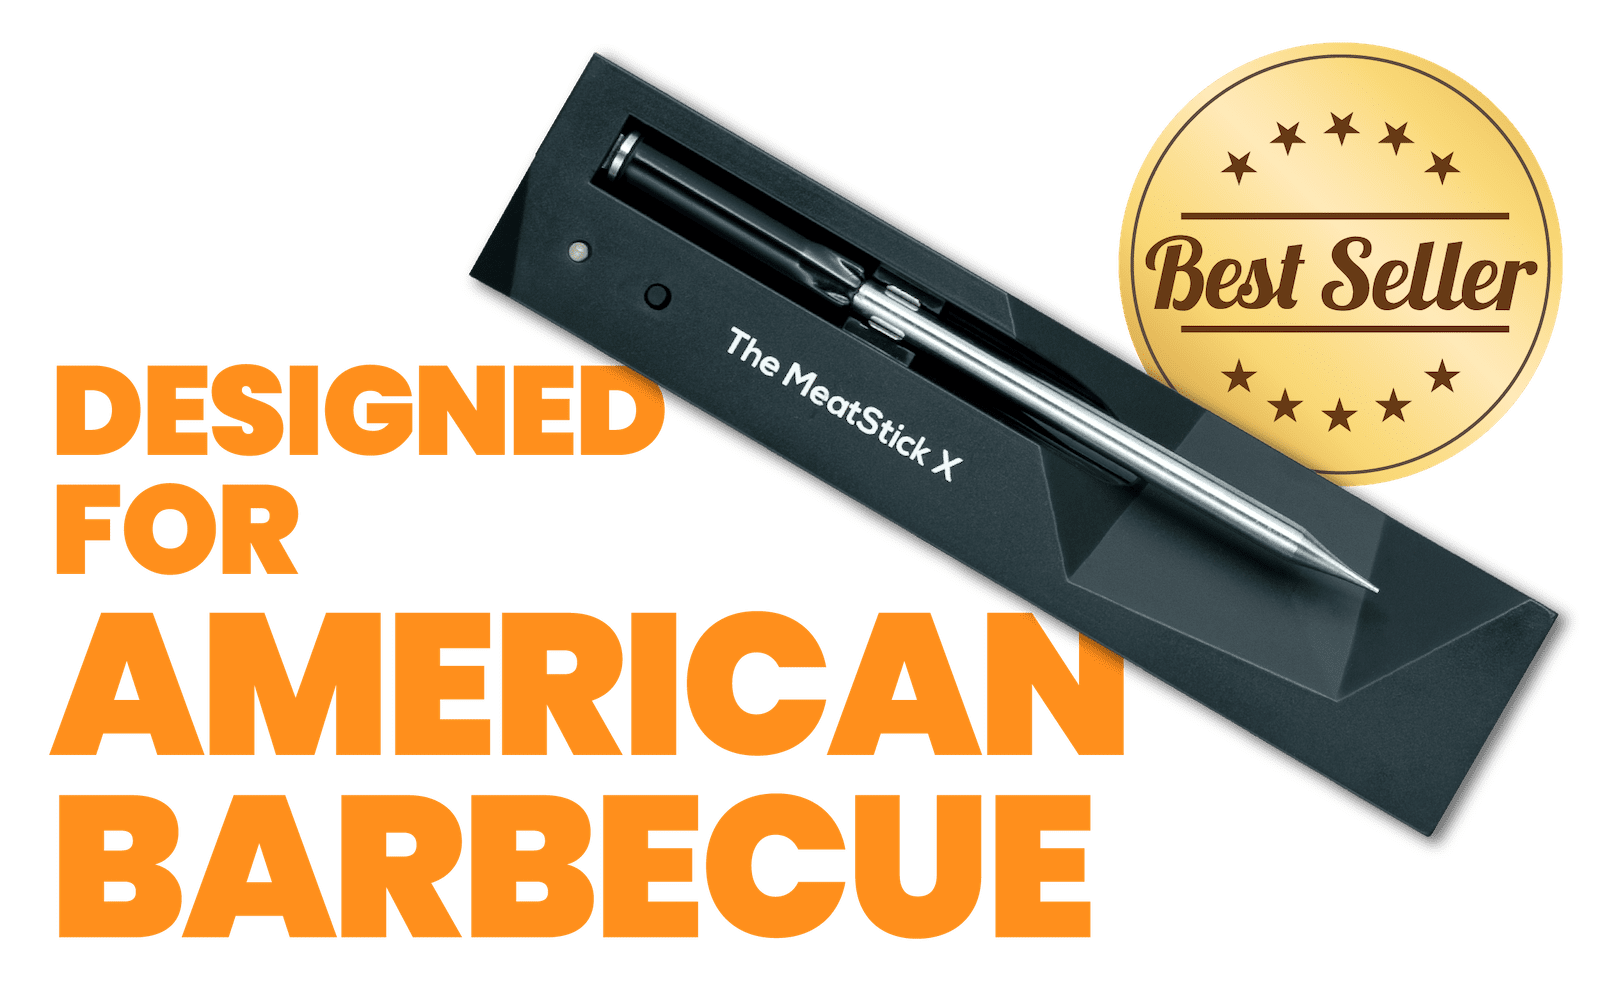 MeatStick Wireless Meat Thermometer Designed For American Barbecue, BBQ